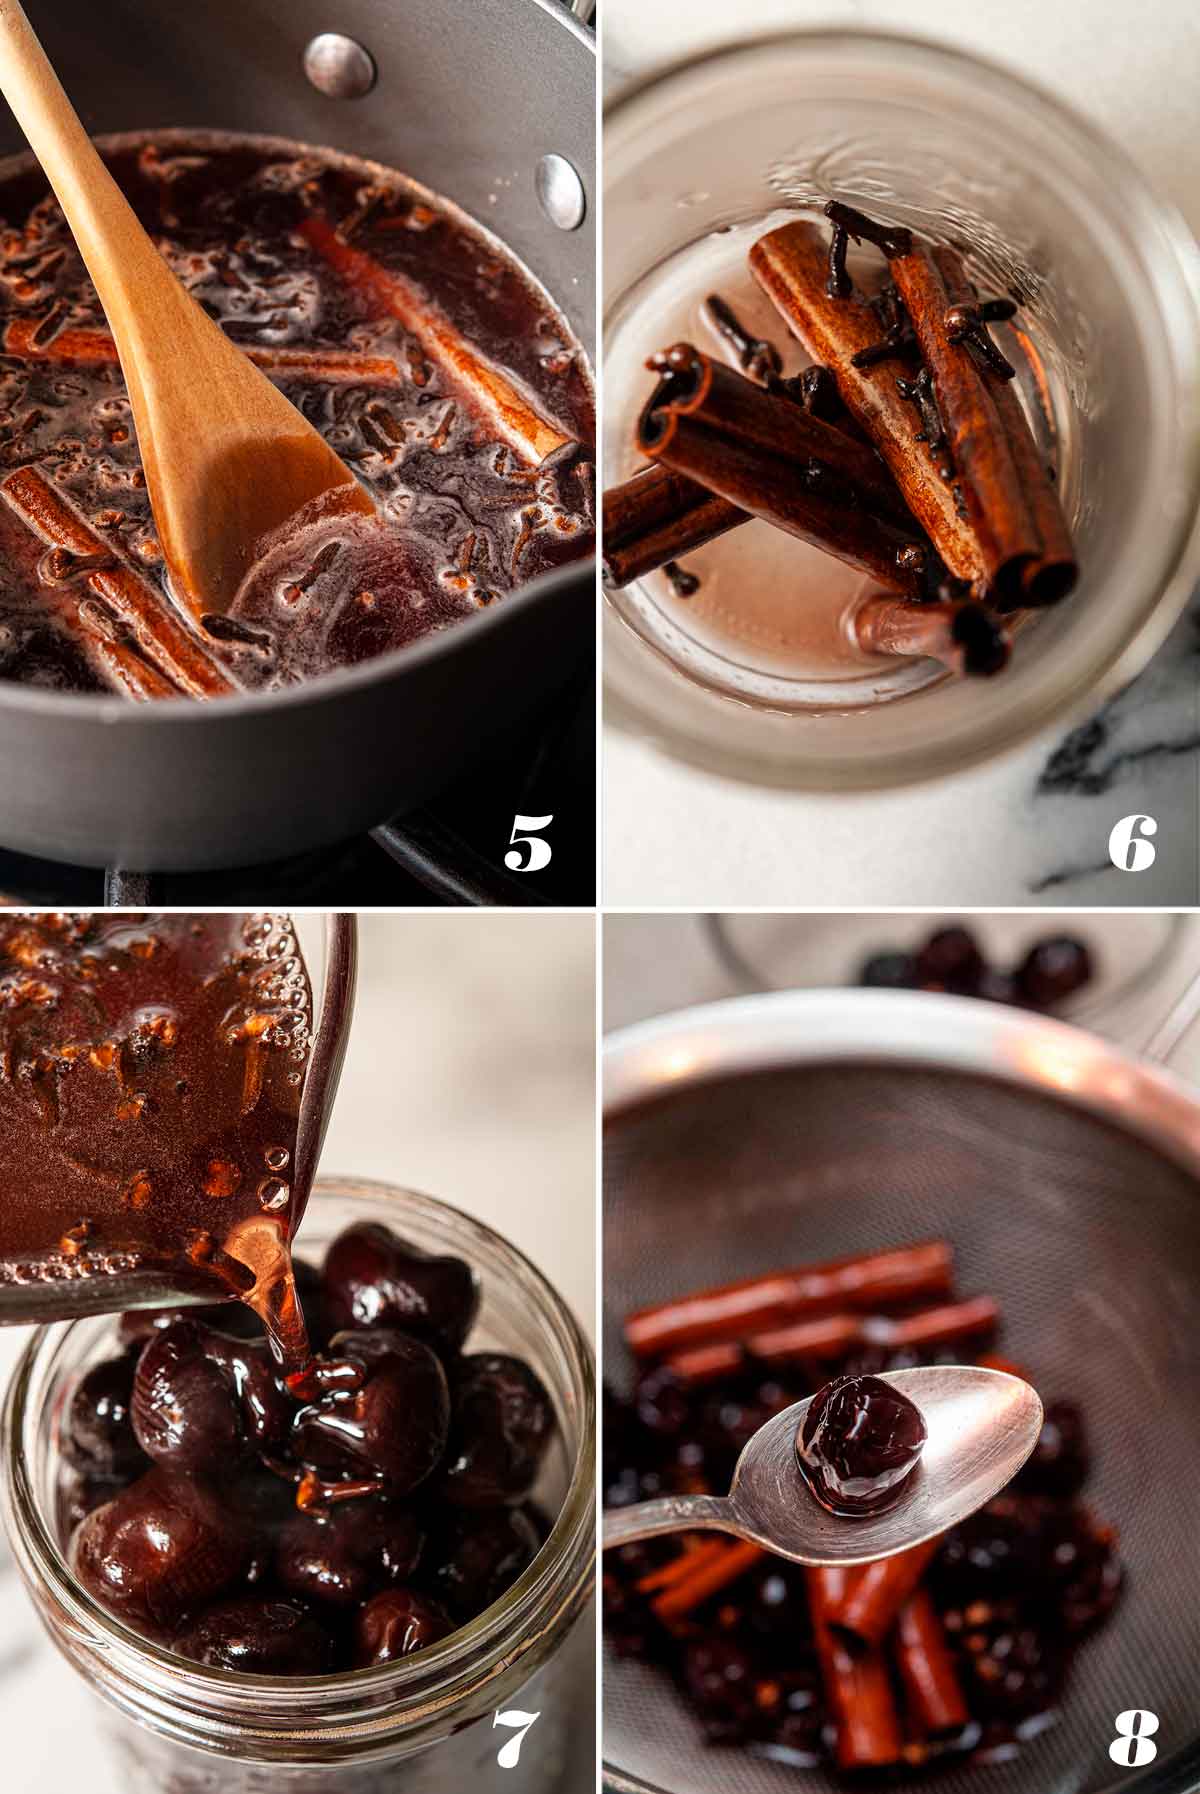 A collage of 4 numbered images showing how to make maraschino cherries.